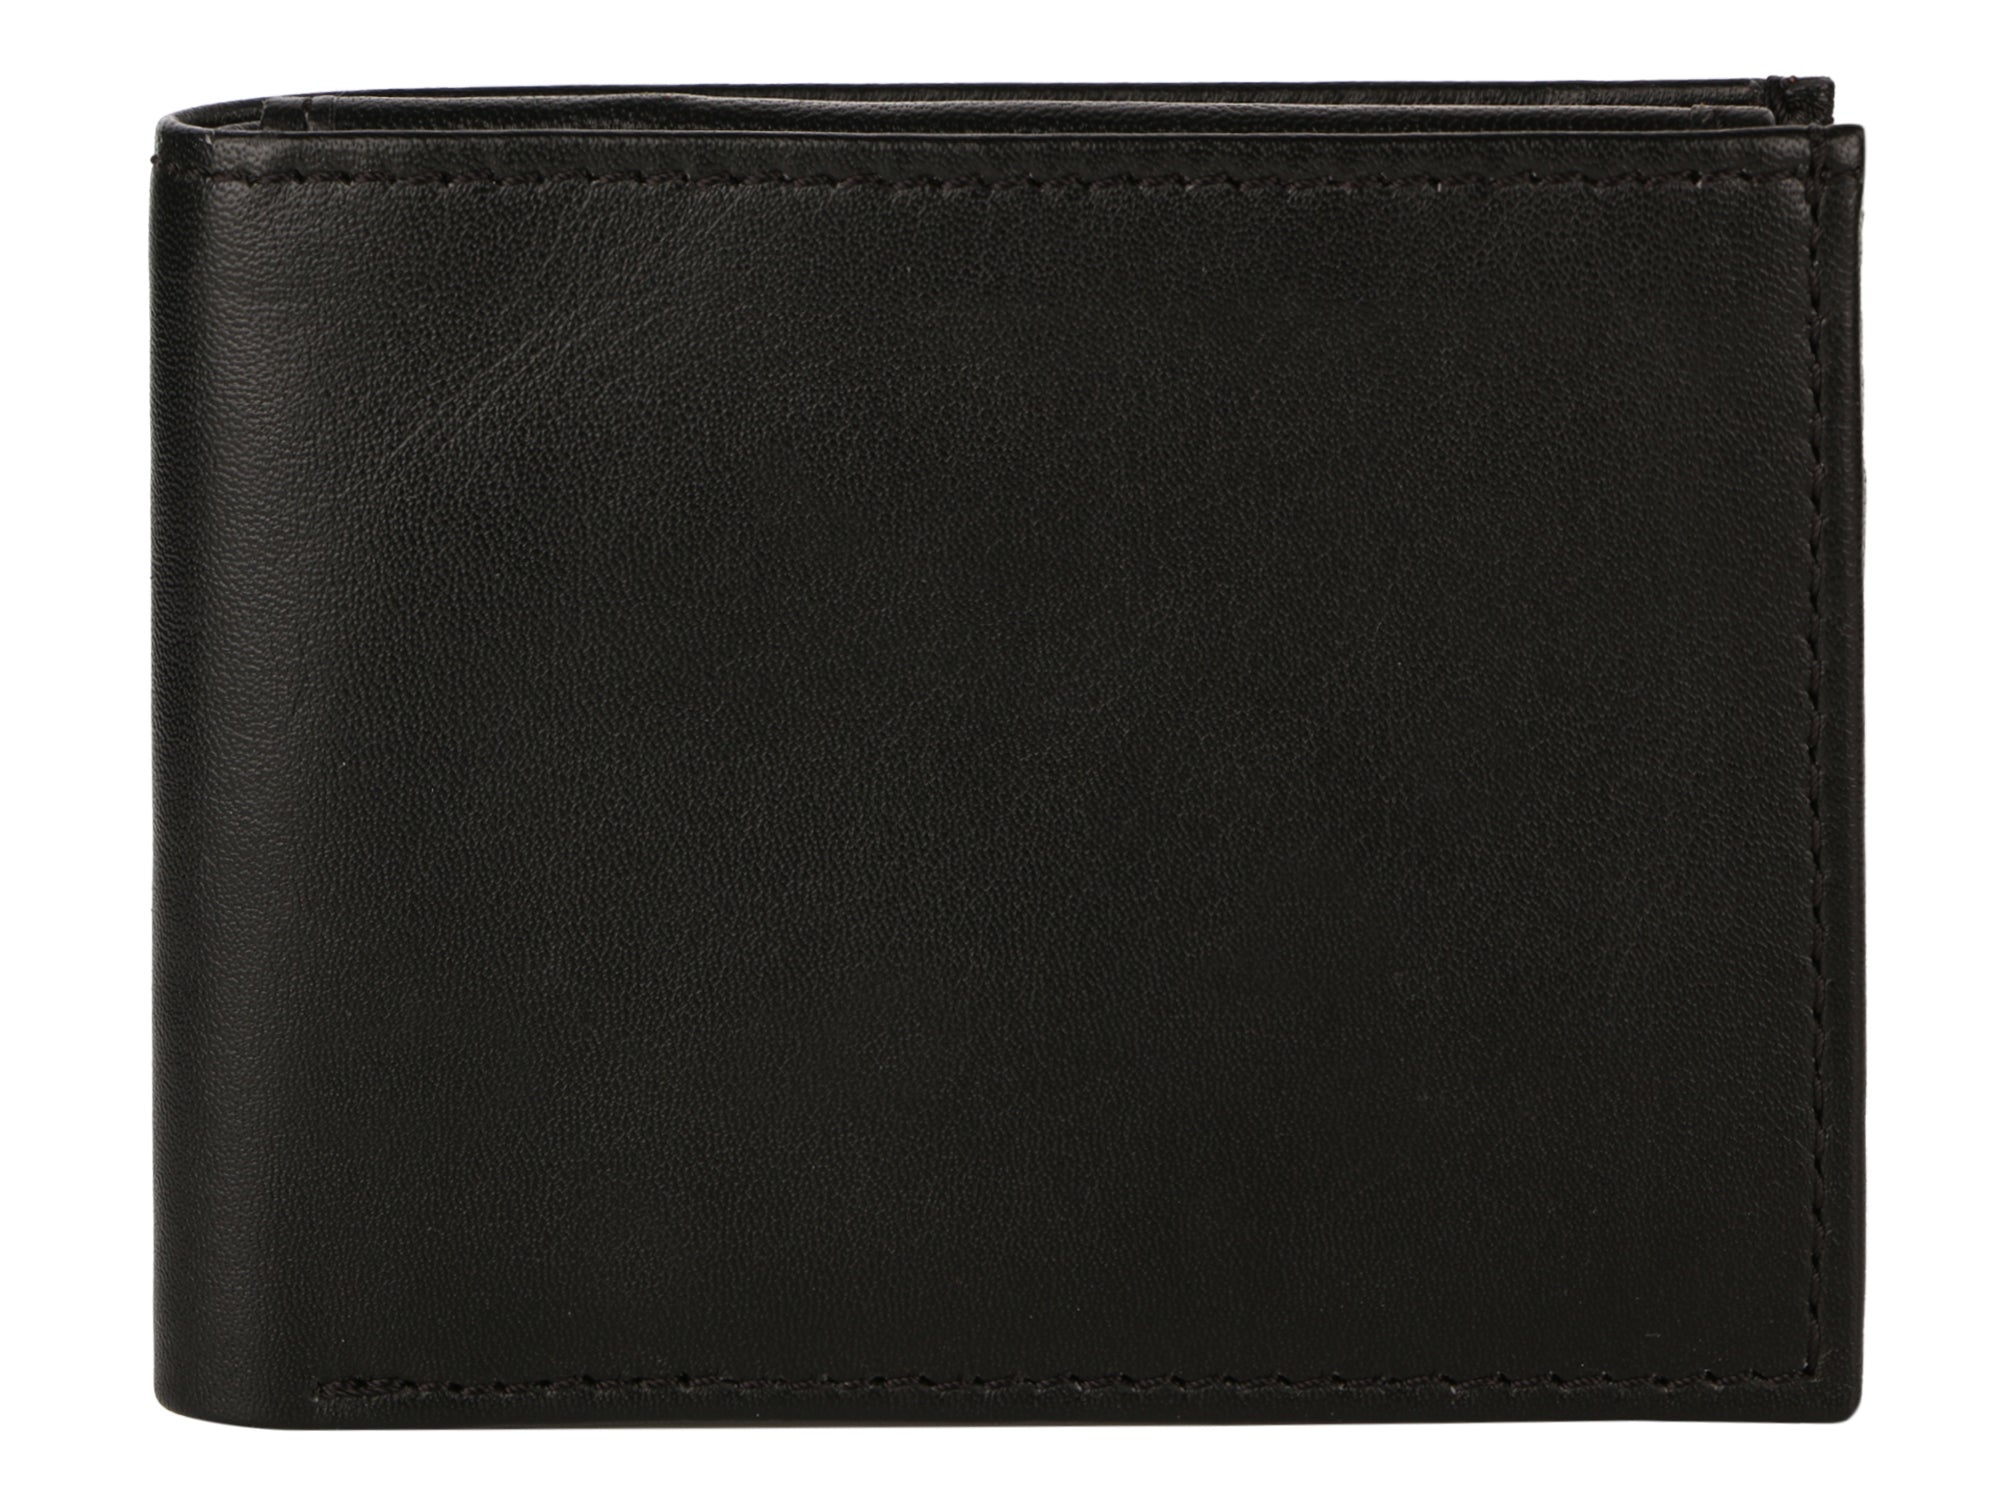 Front image of FRED HESS MENS WALLET